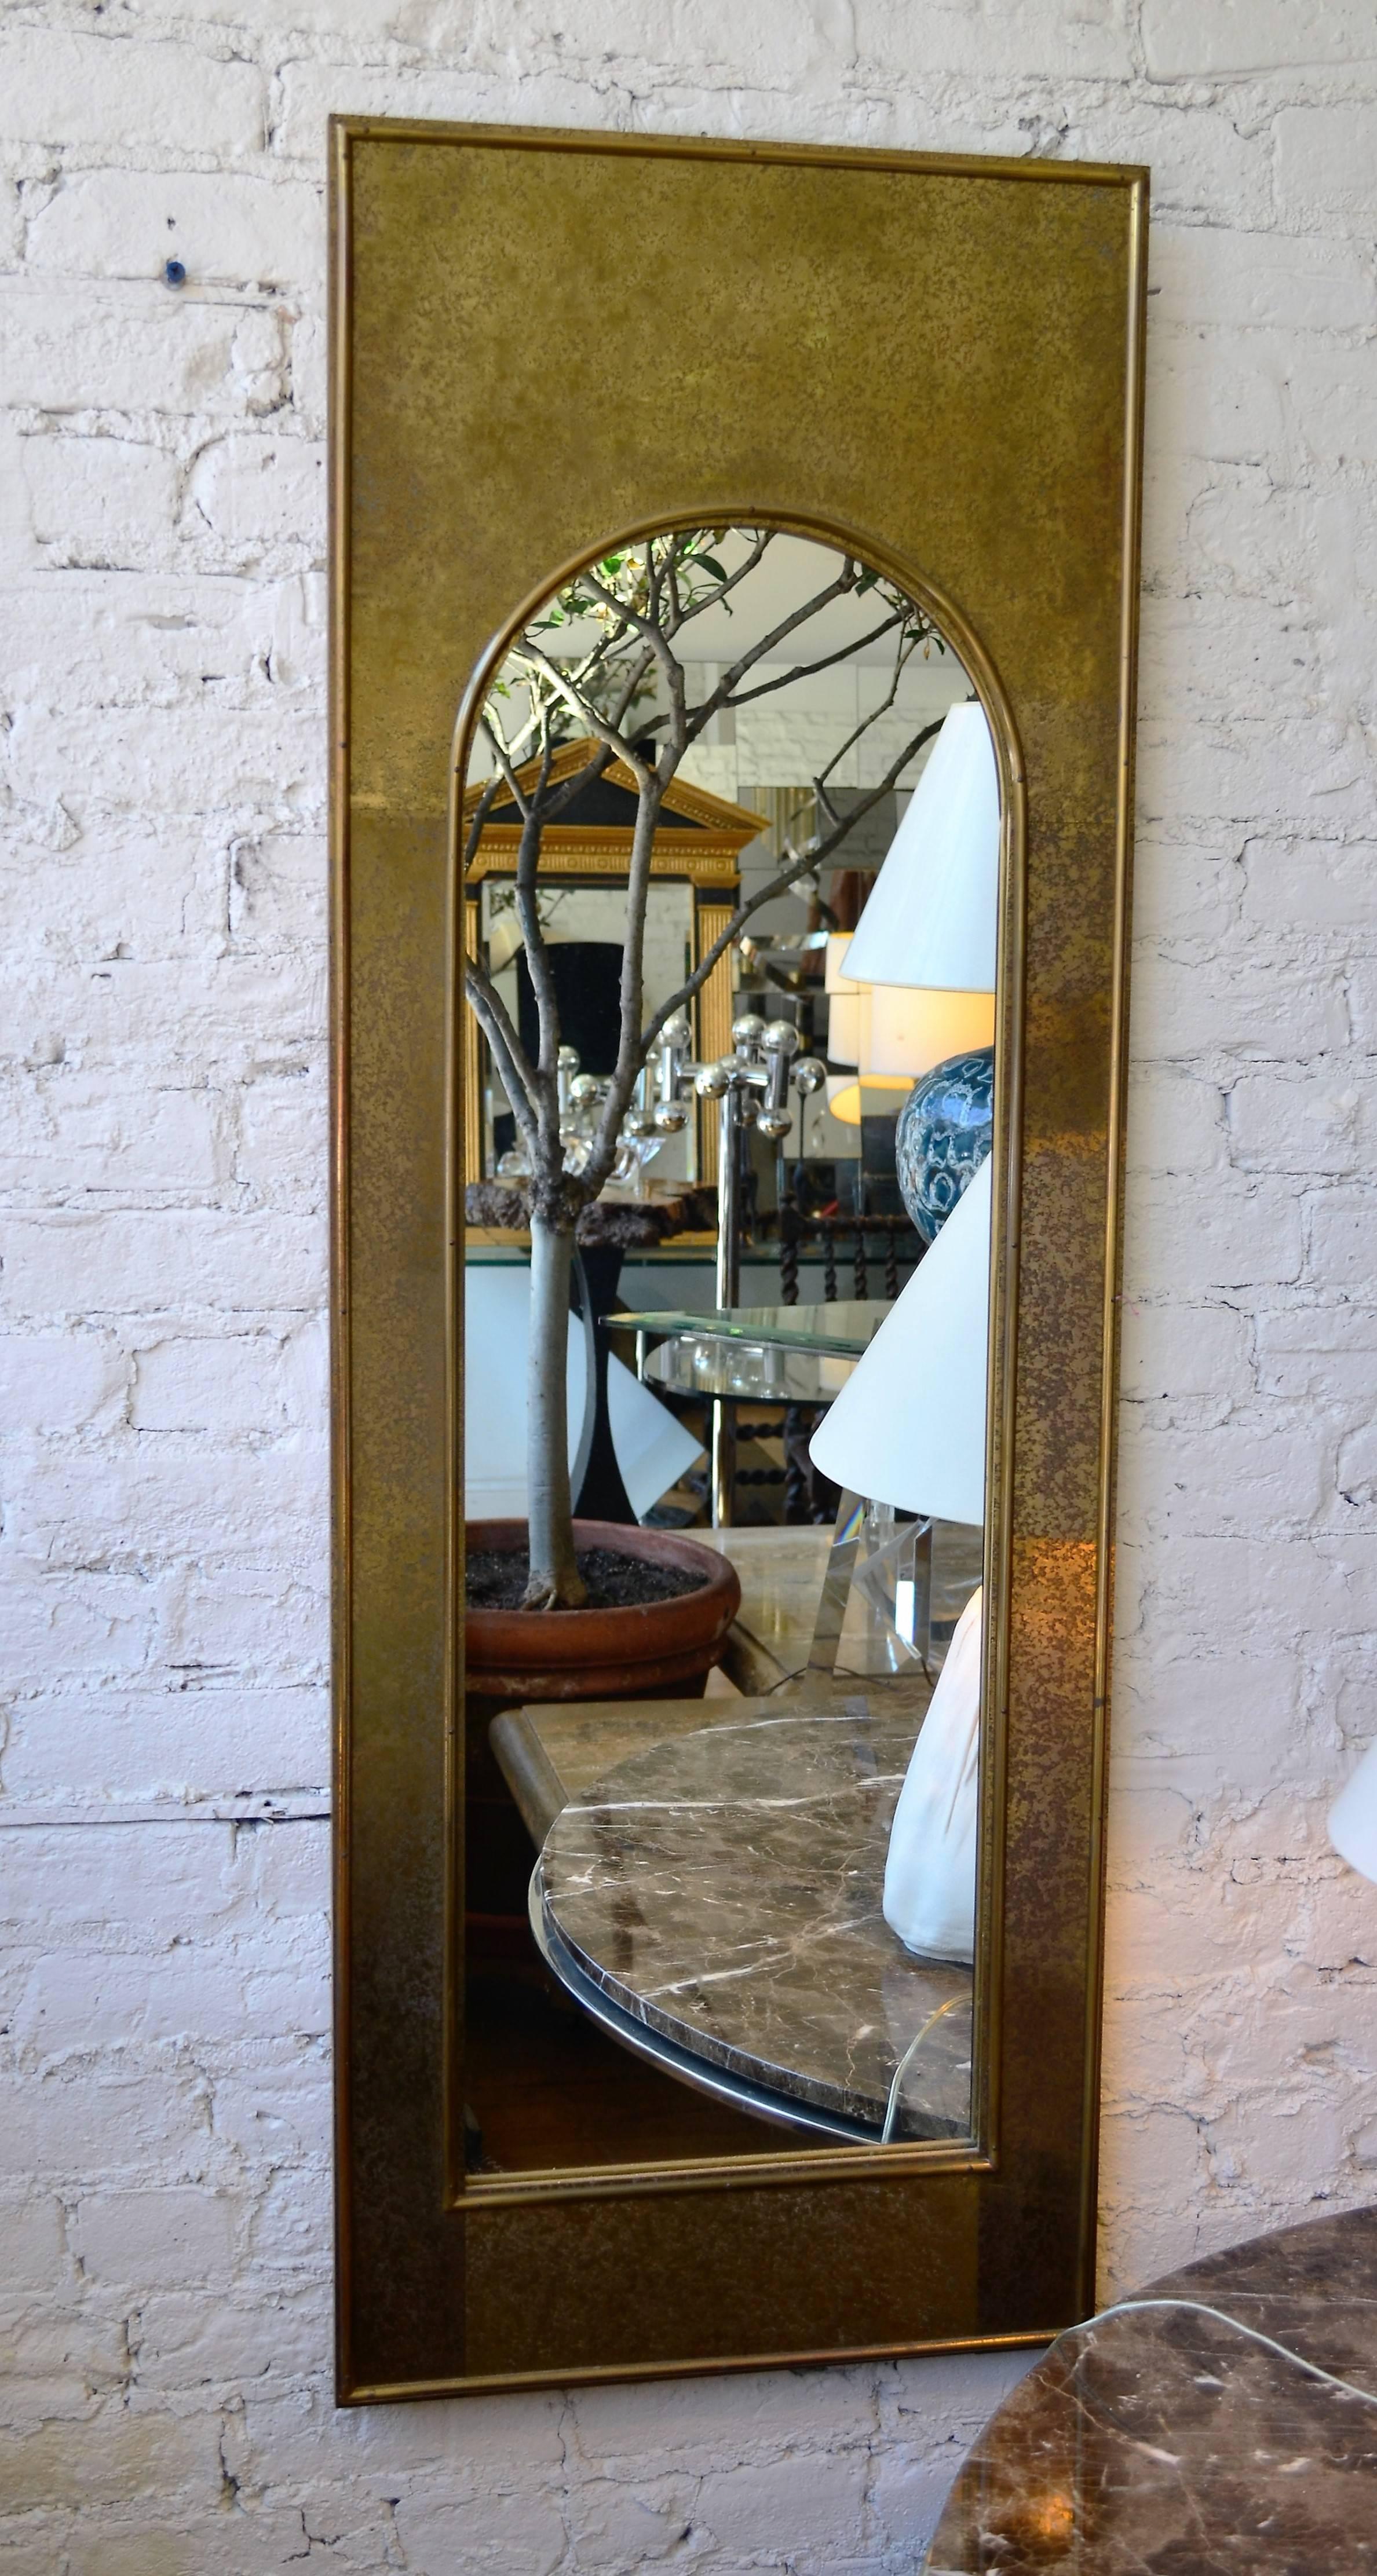 An elegant brass clad Midcentury Mastercraft mirror with an arched top.